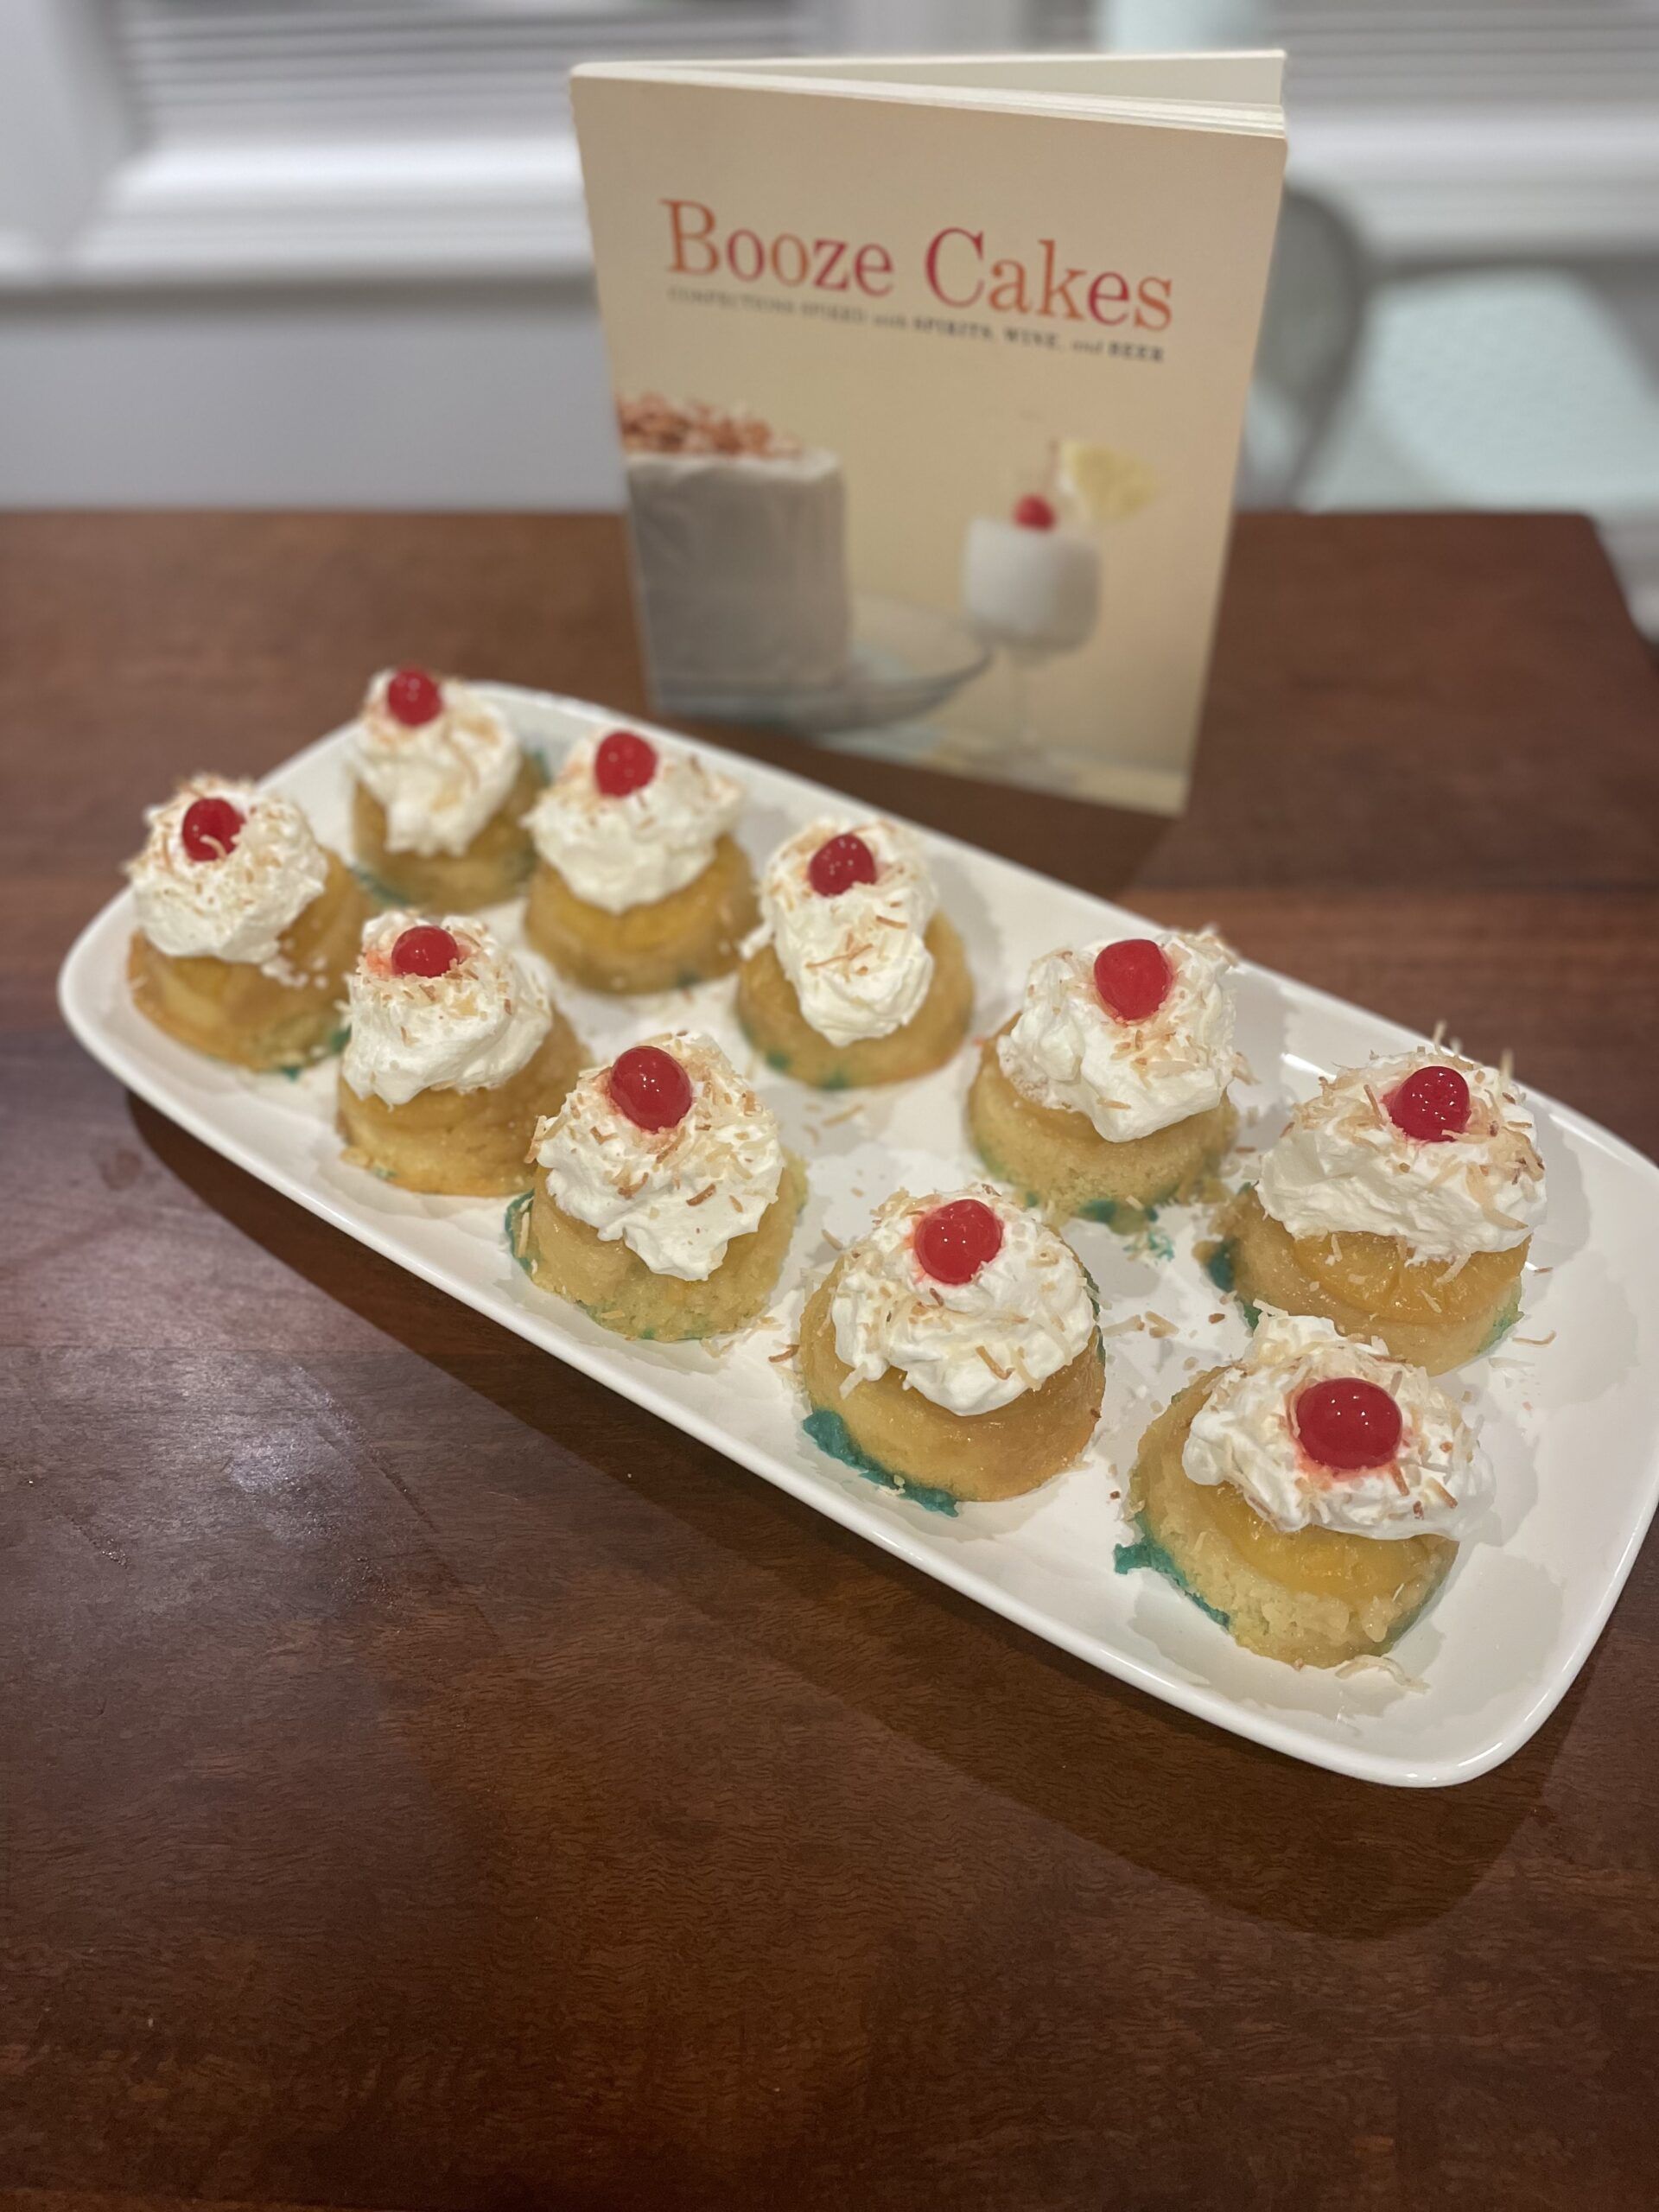 Image of twelve cupcakes on a rectangular serving dish. Each cupcake is topped with a pineapple ring, whipped cream, cherry, and toasted coconut. The tray sits in front of Booze Cakes cookbook.